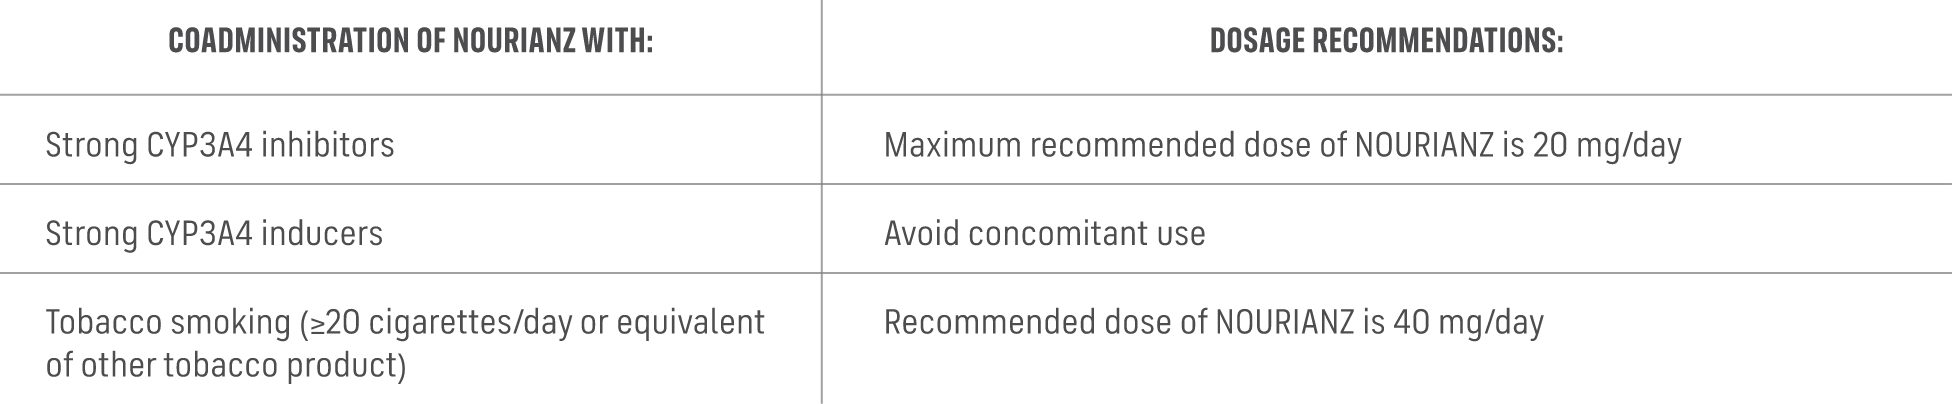 Nourianz recommended dosage chart